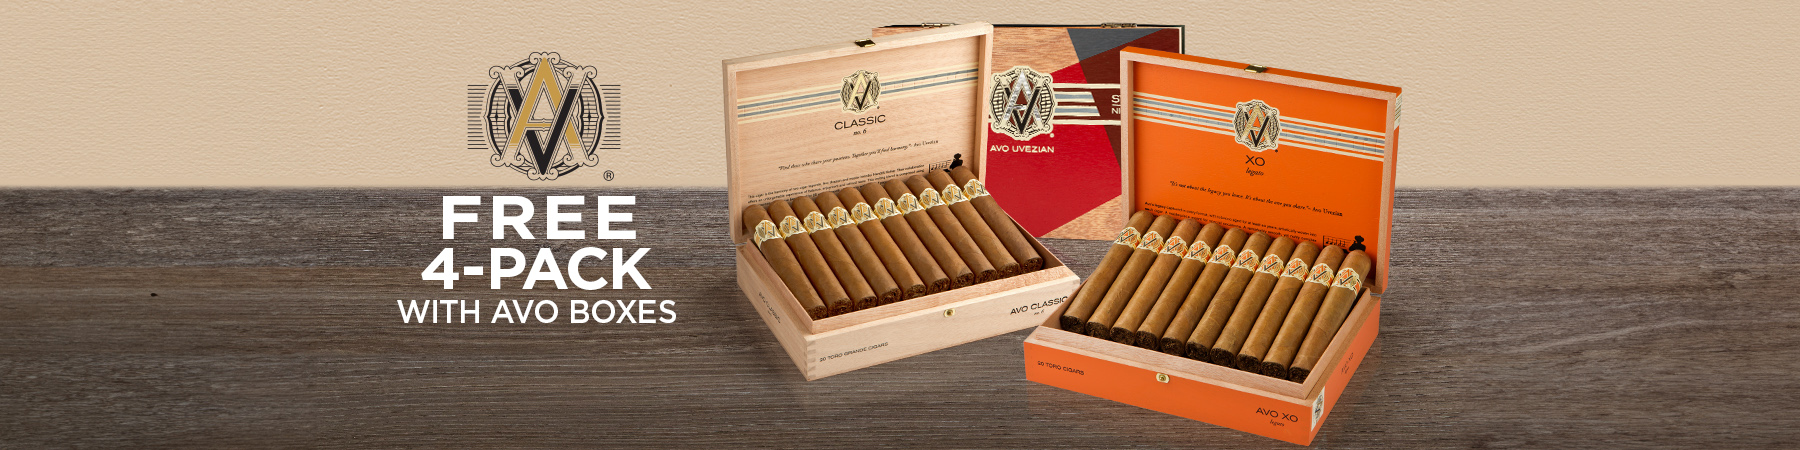 https://www.jrcigars.com/on/demandware.static/-/Library-Sites-JRCigarsSharedLibrary/default/dw6381b4e5/images/banners/04012024-04072024/JR-04042024-deal-3-large-1800x450.jpg